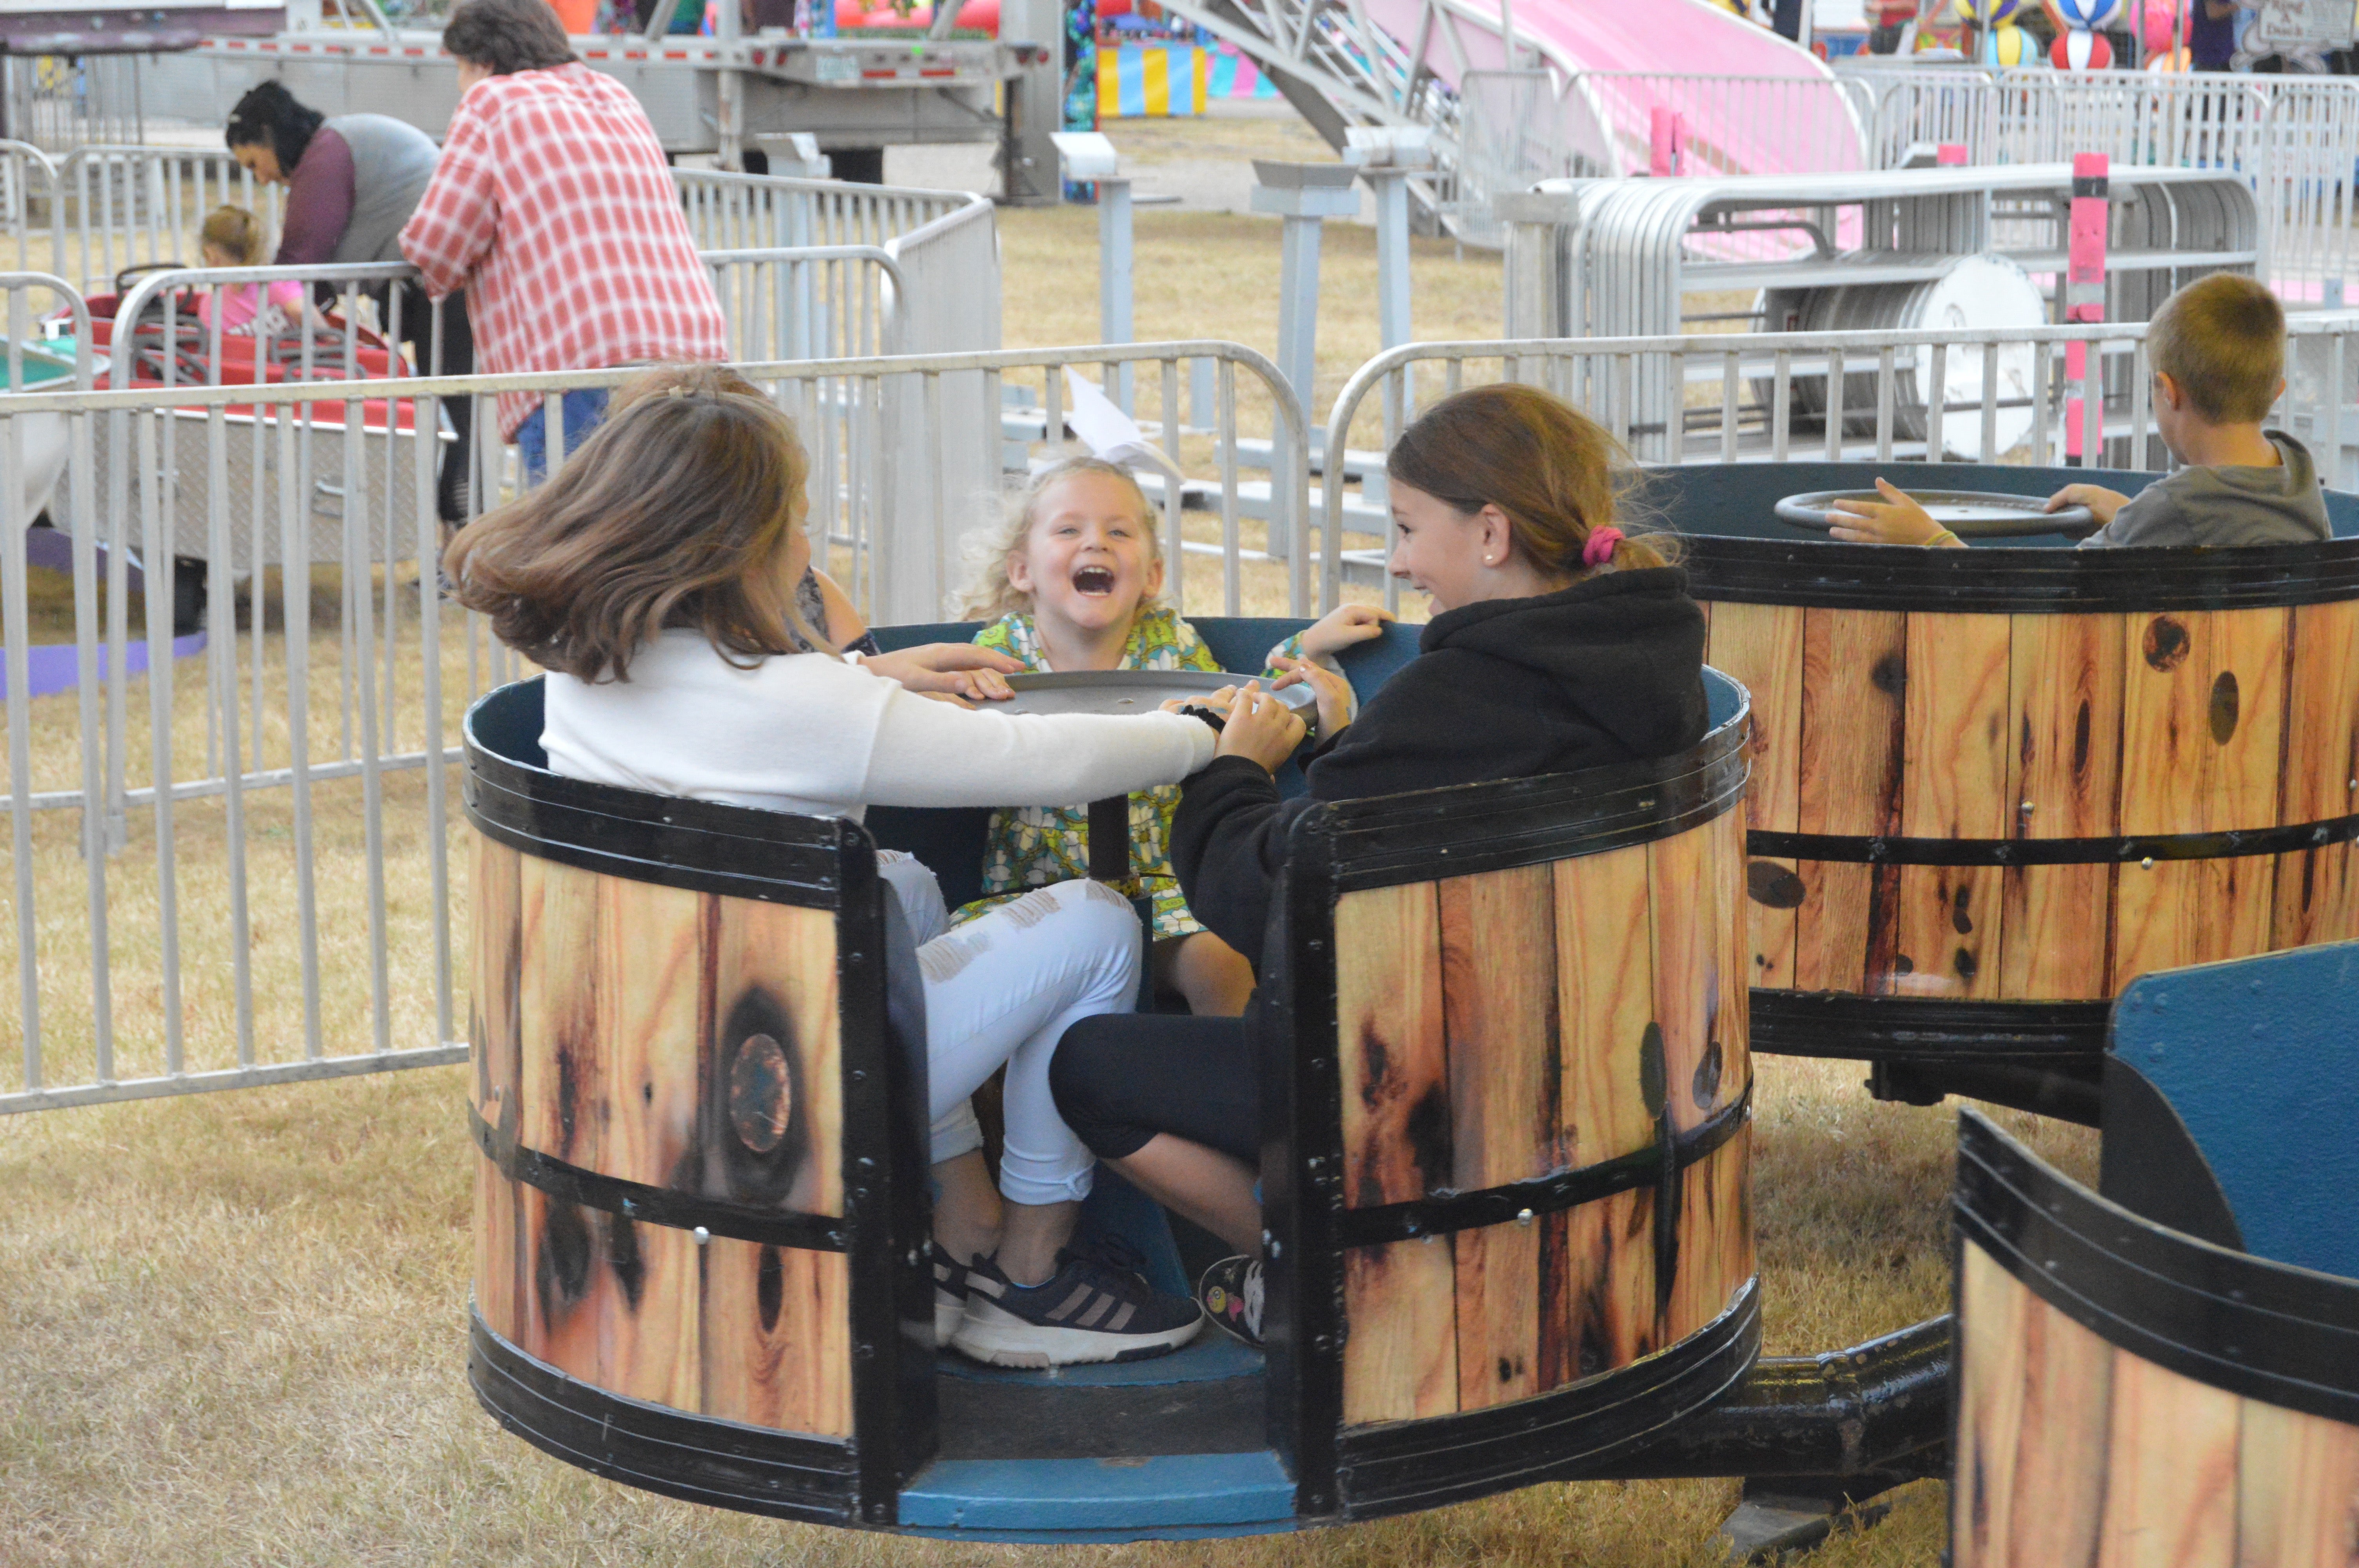 COVINGTON COUNTY FAIR IS A GO, WITH MINOR CHANGES The Andalusia Star